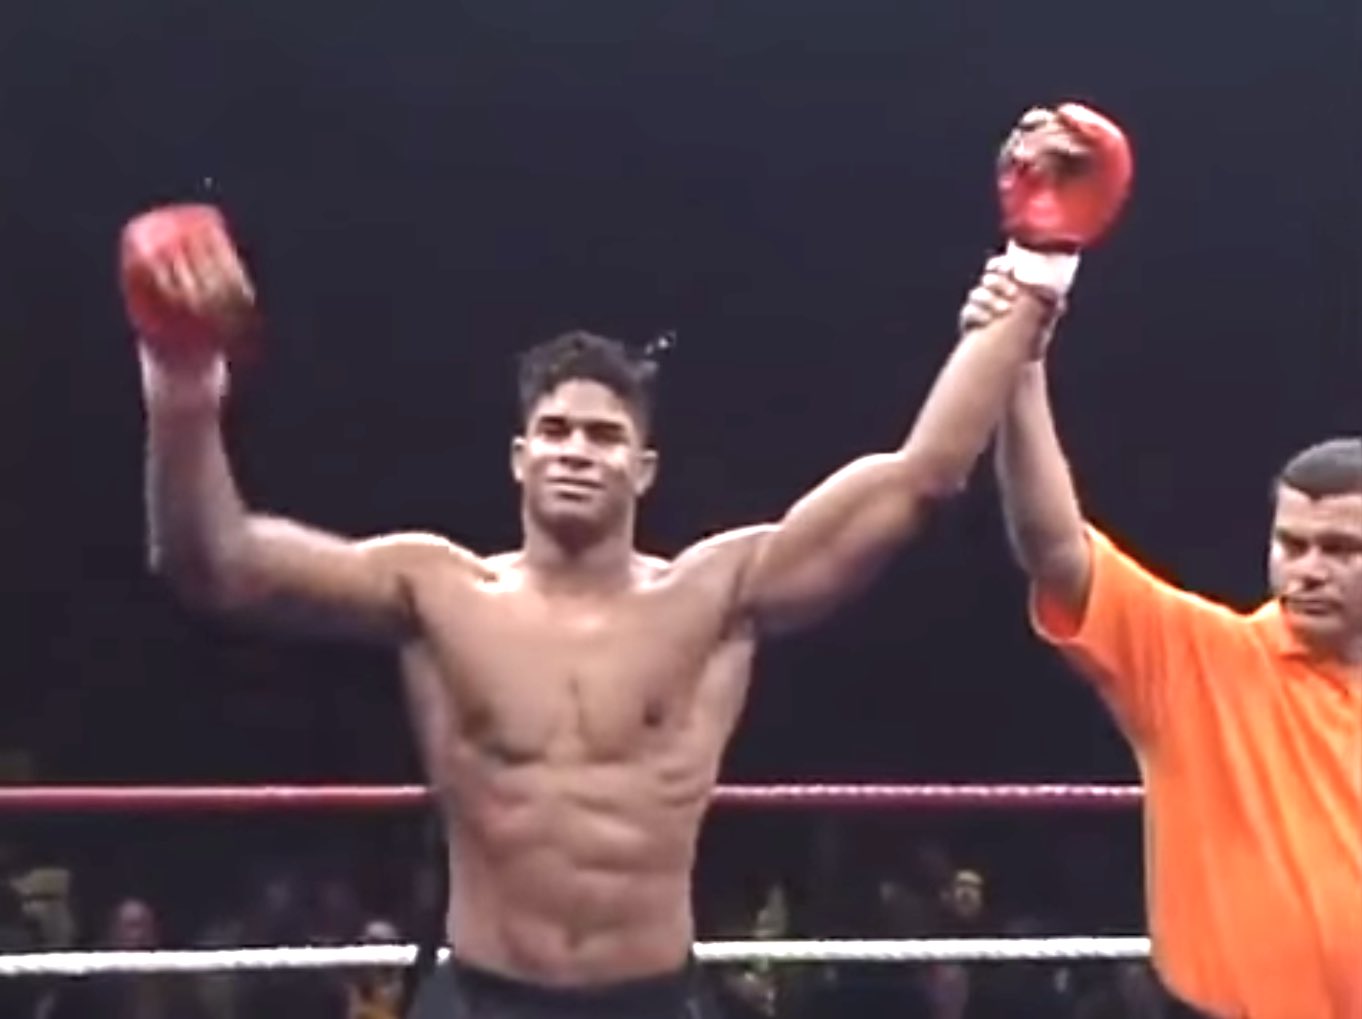 MMA History Today on Twitter: "Feb6.2000 Alistair Overeem earns the first TKO victory of his career, when he finishes Chris Watts with a knee to the body https://t.co/0ex1Pe0tnq" / Twitter